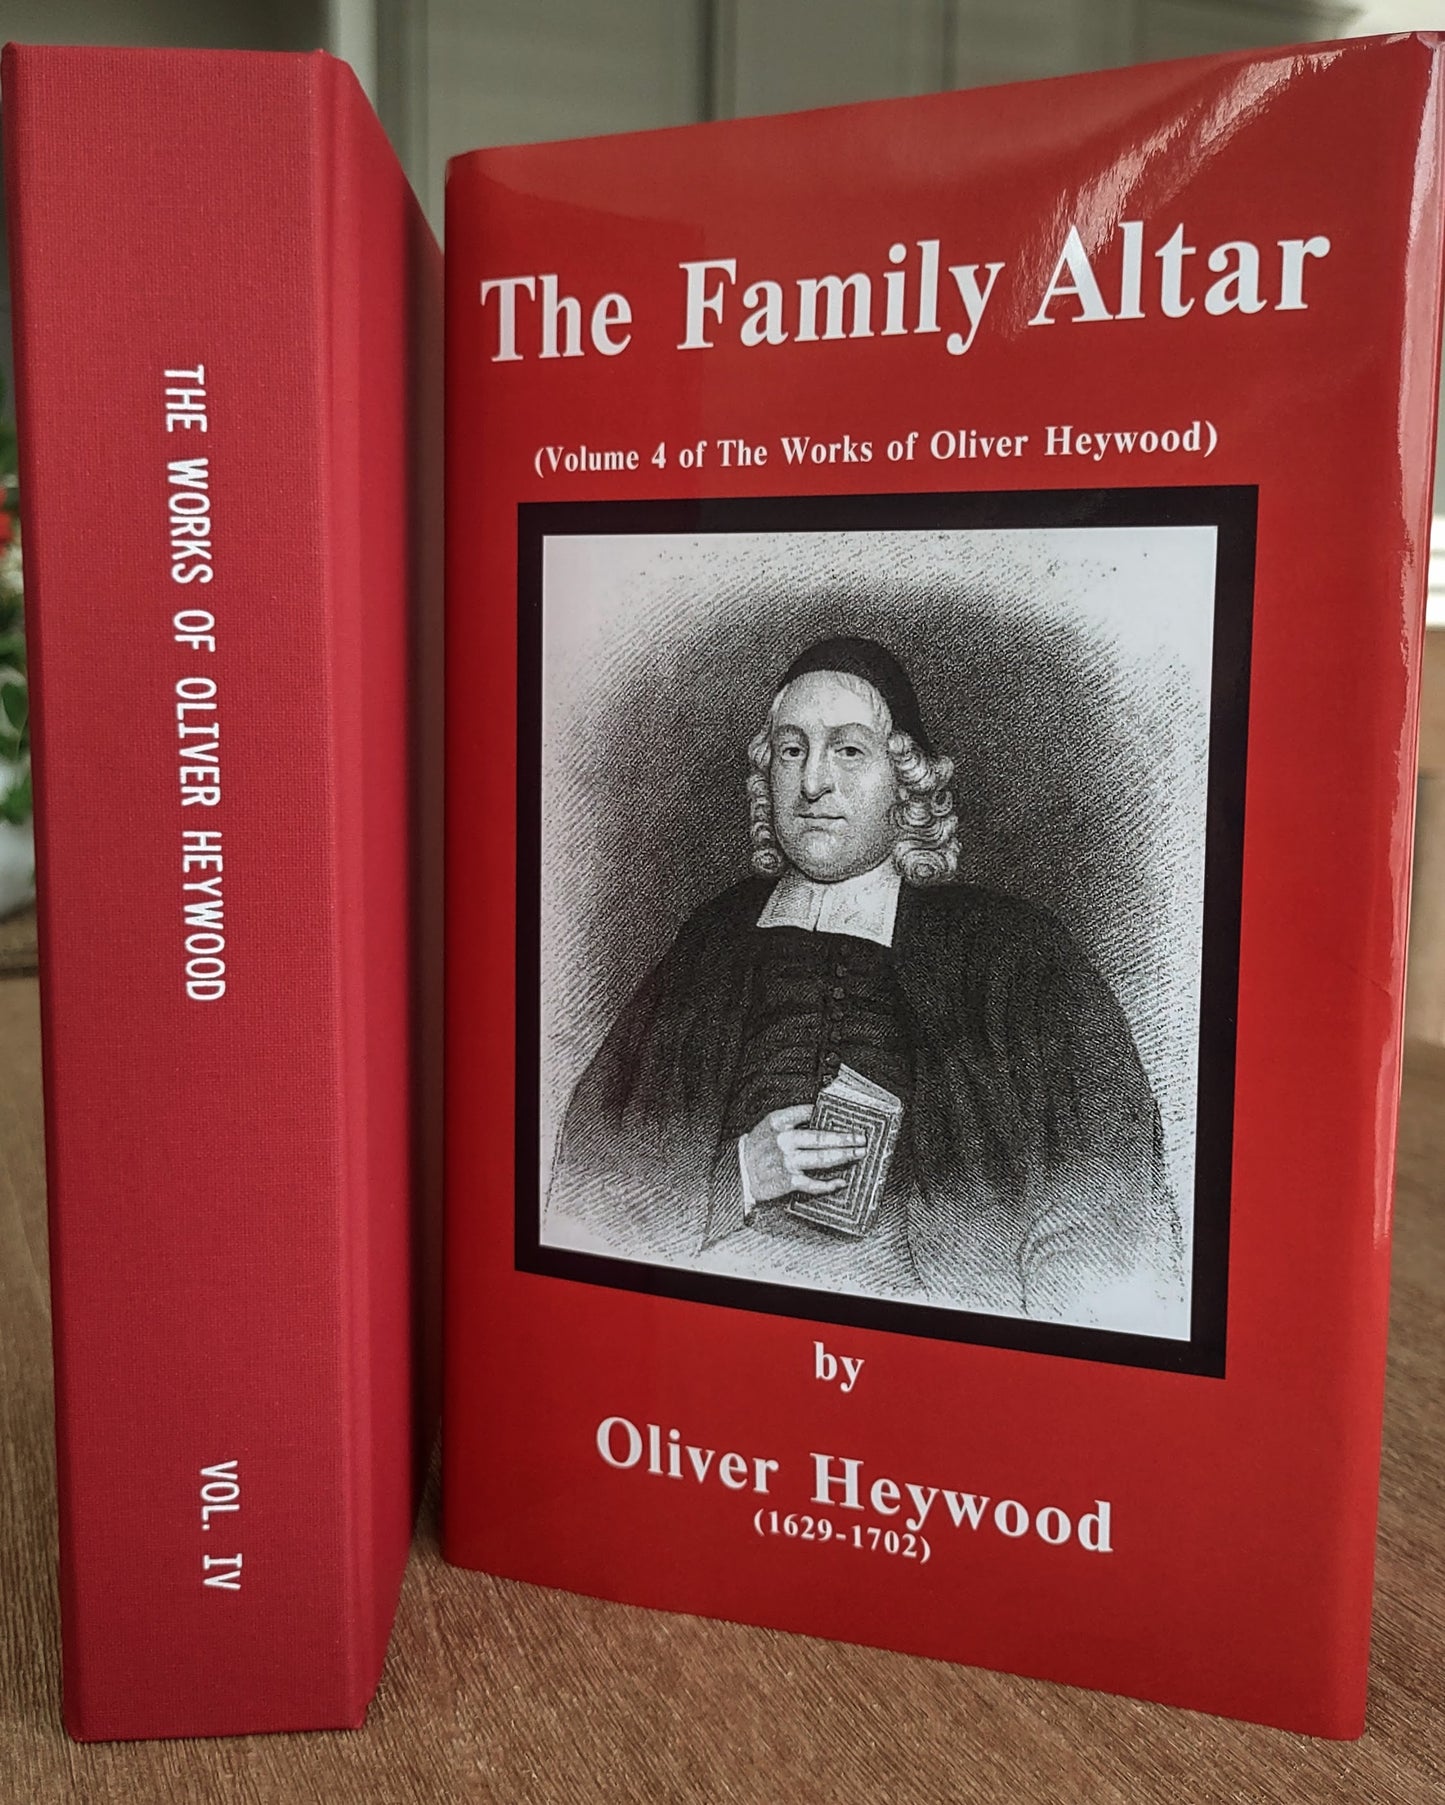 The Family Altar - Volume 4 of the Works of Oliver Heywood